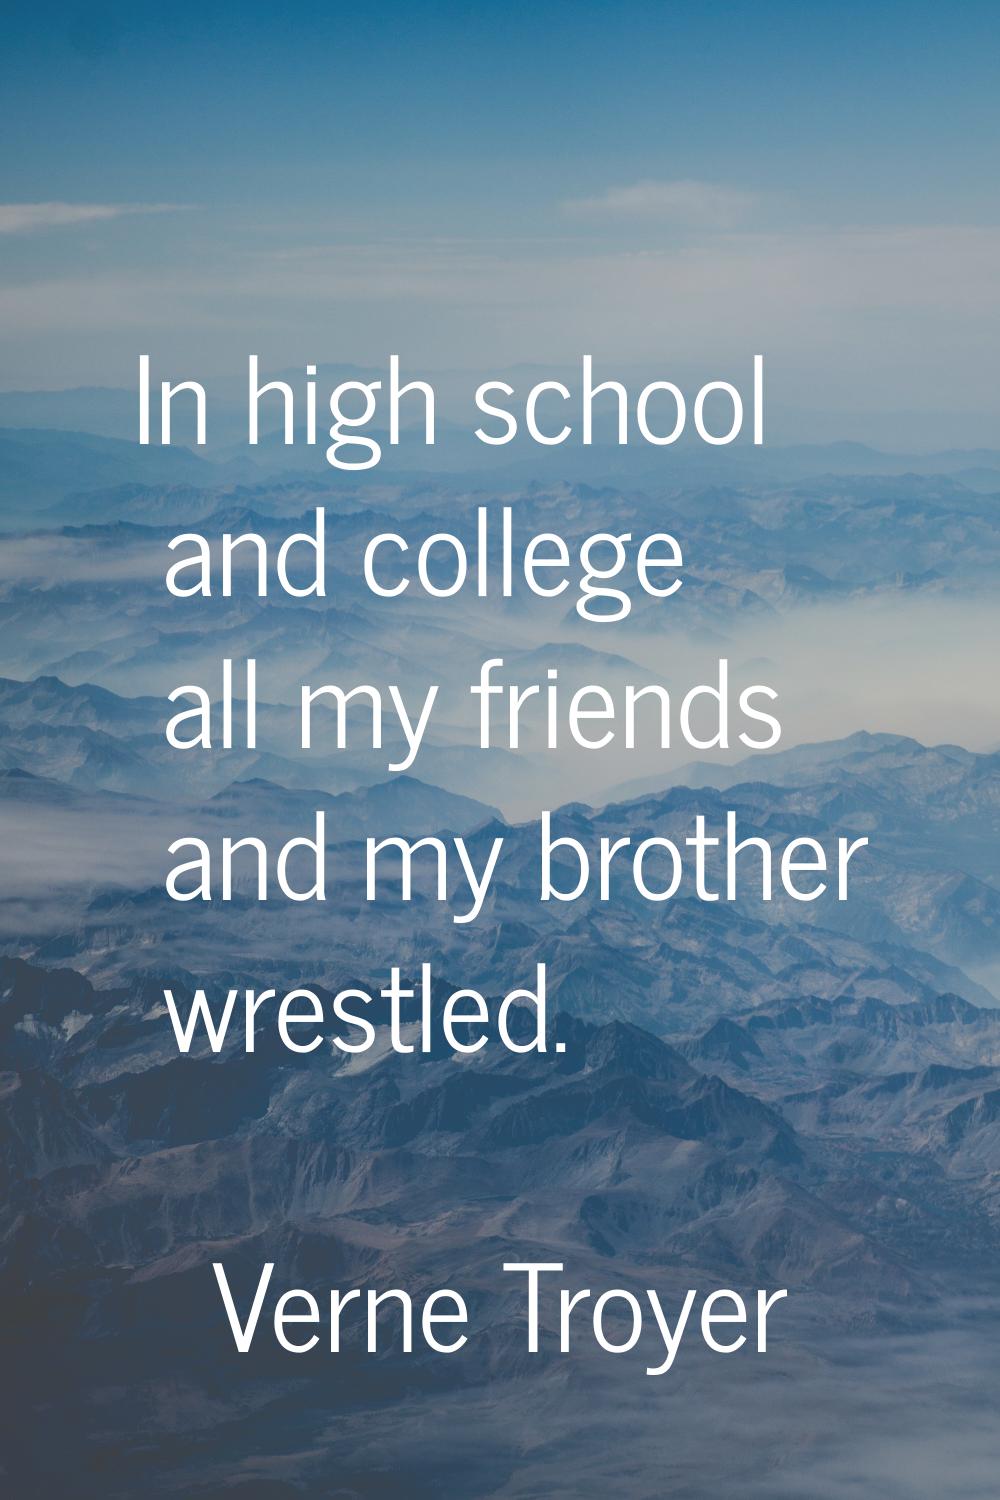 In high school and college all my friends and my brother wrestled.